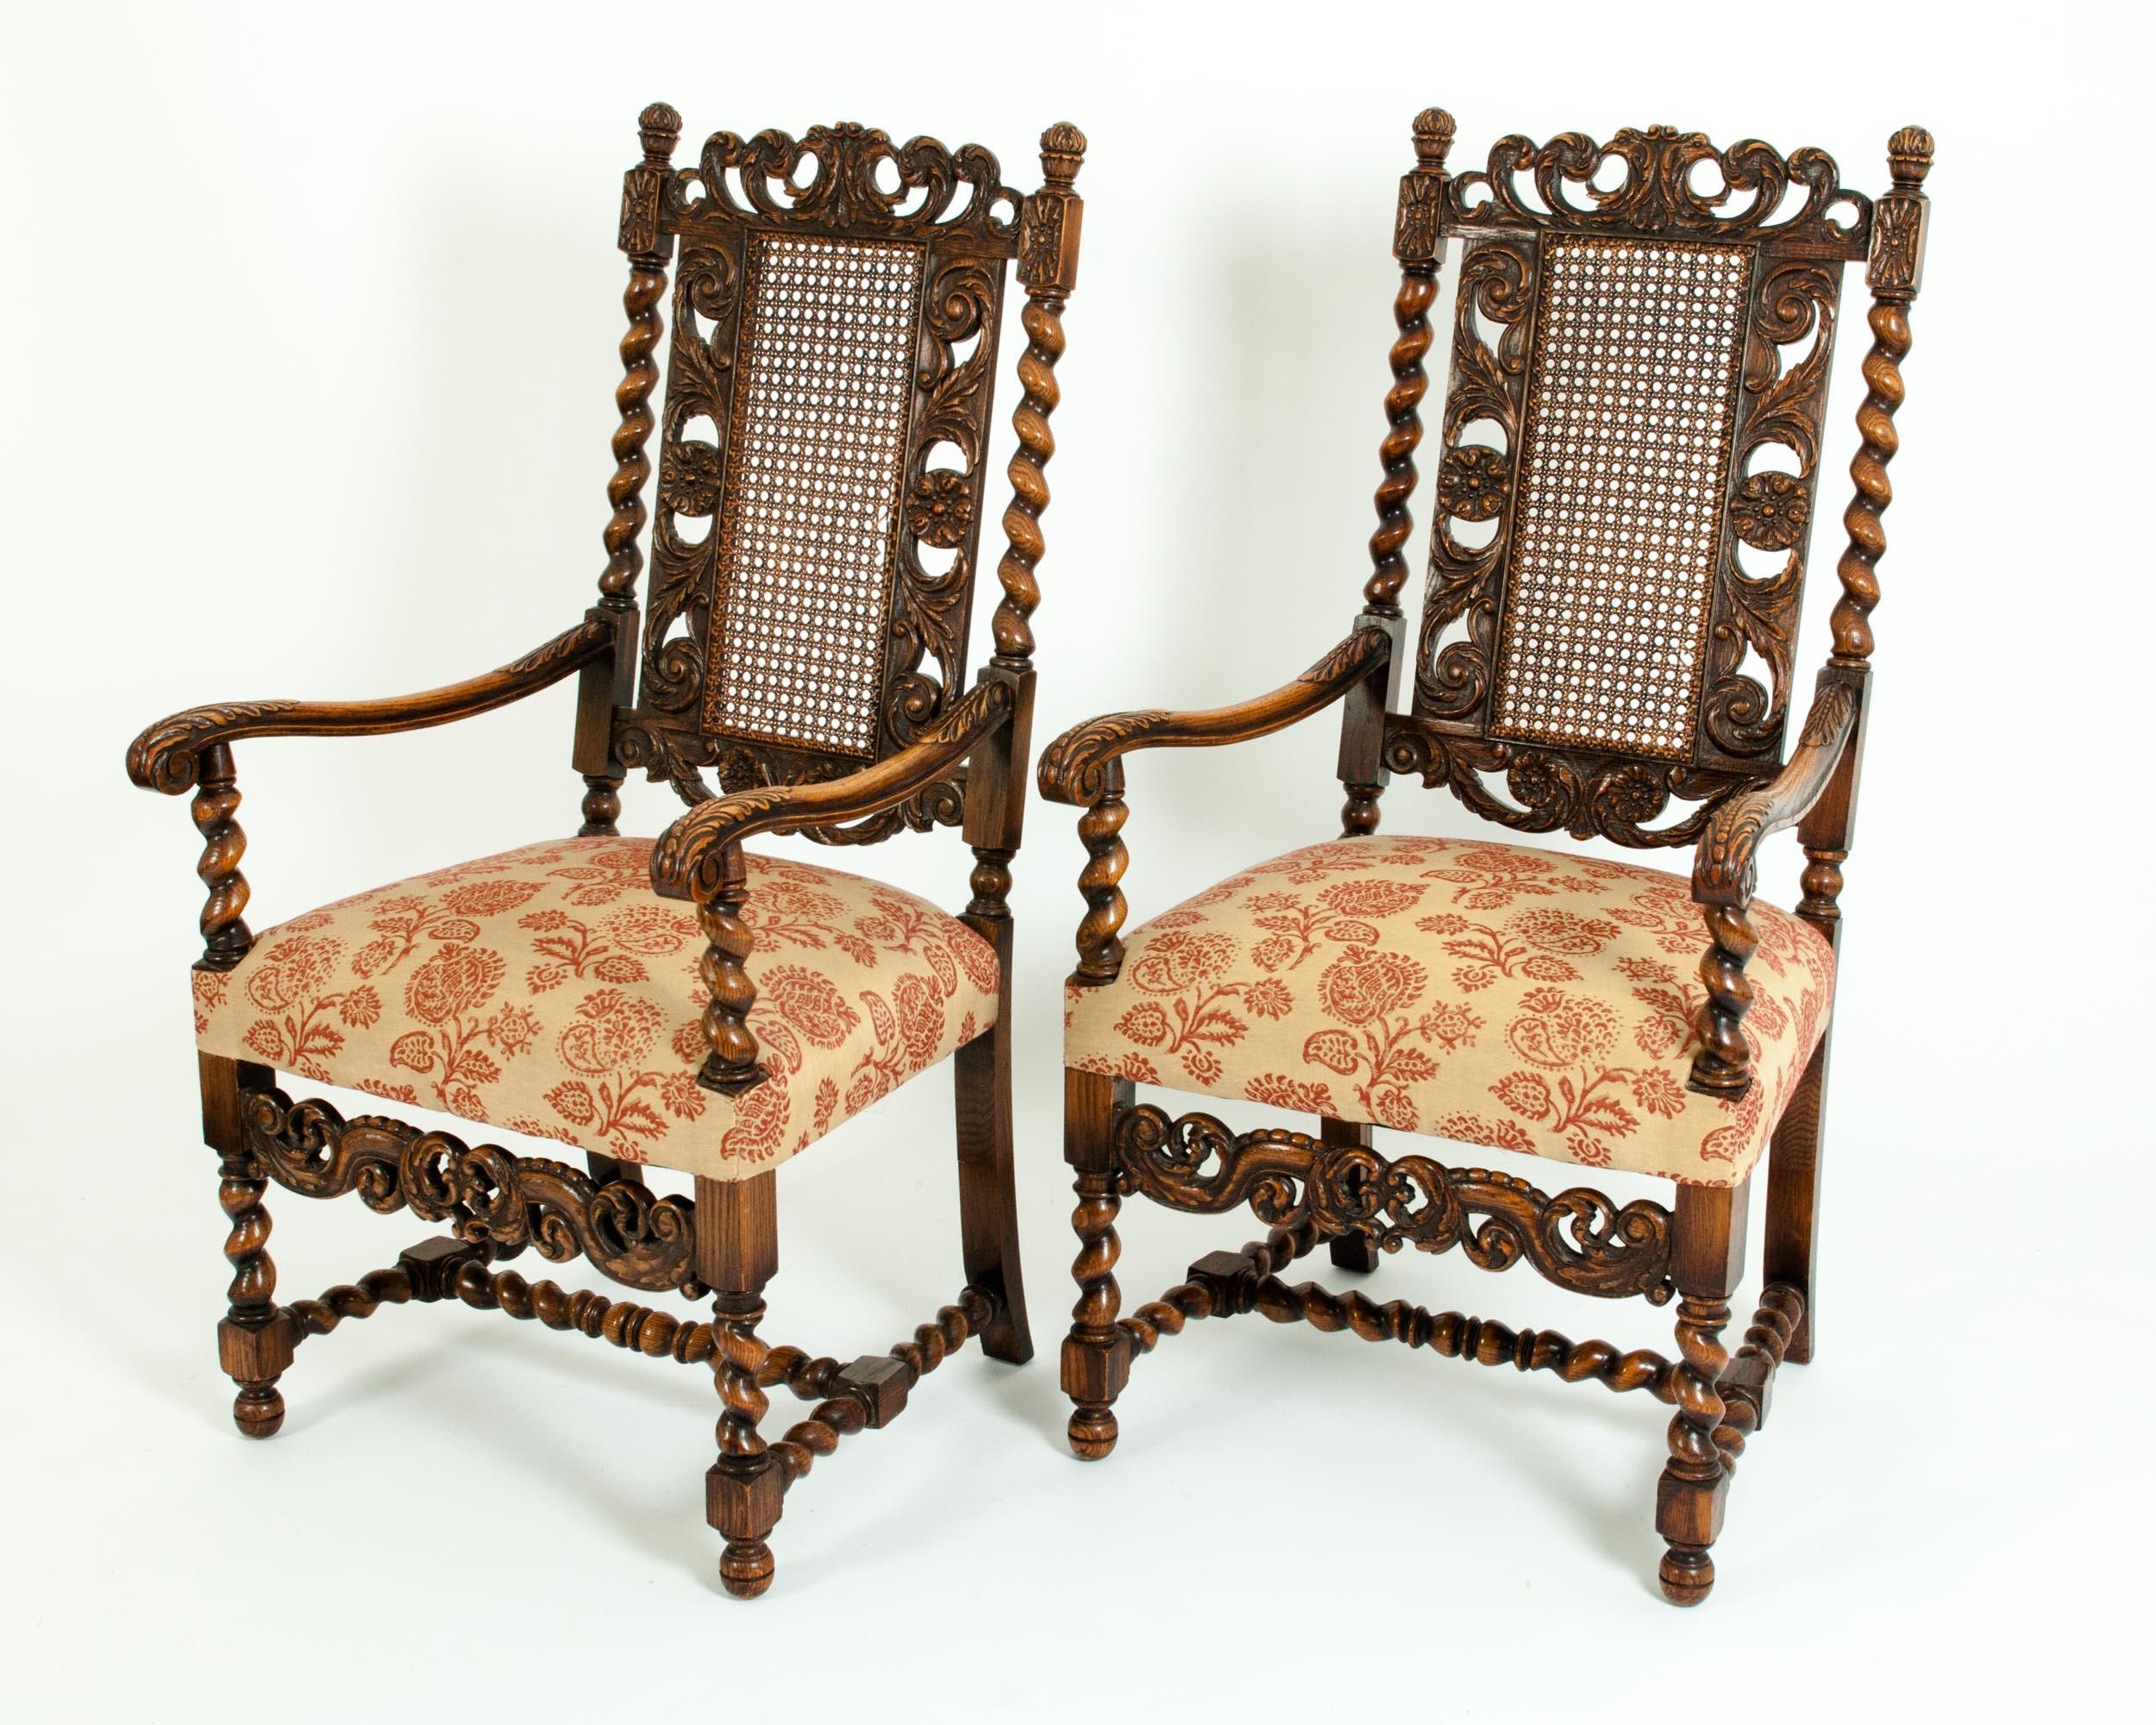 Late 19th century Renaissance Revival hand carved walnut with back cane armchairs / corner chairs. Each armchair features a tall back ornate spiral carved barley twist walnut frame with scroll work. Very impressive hand carved chair with remarkable